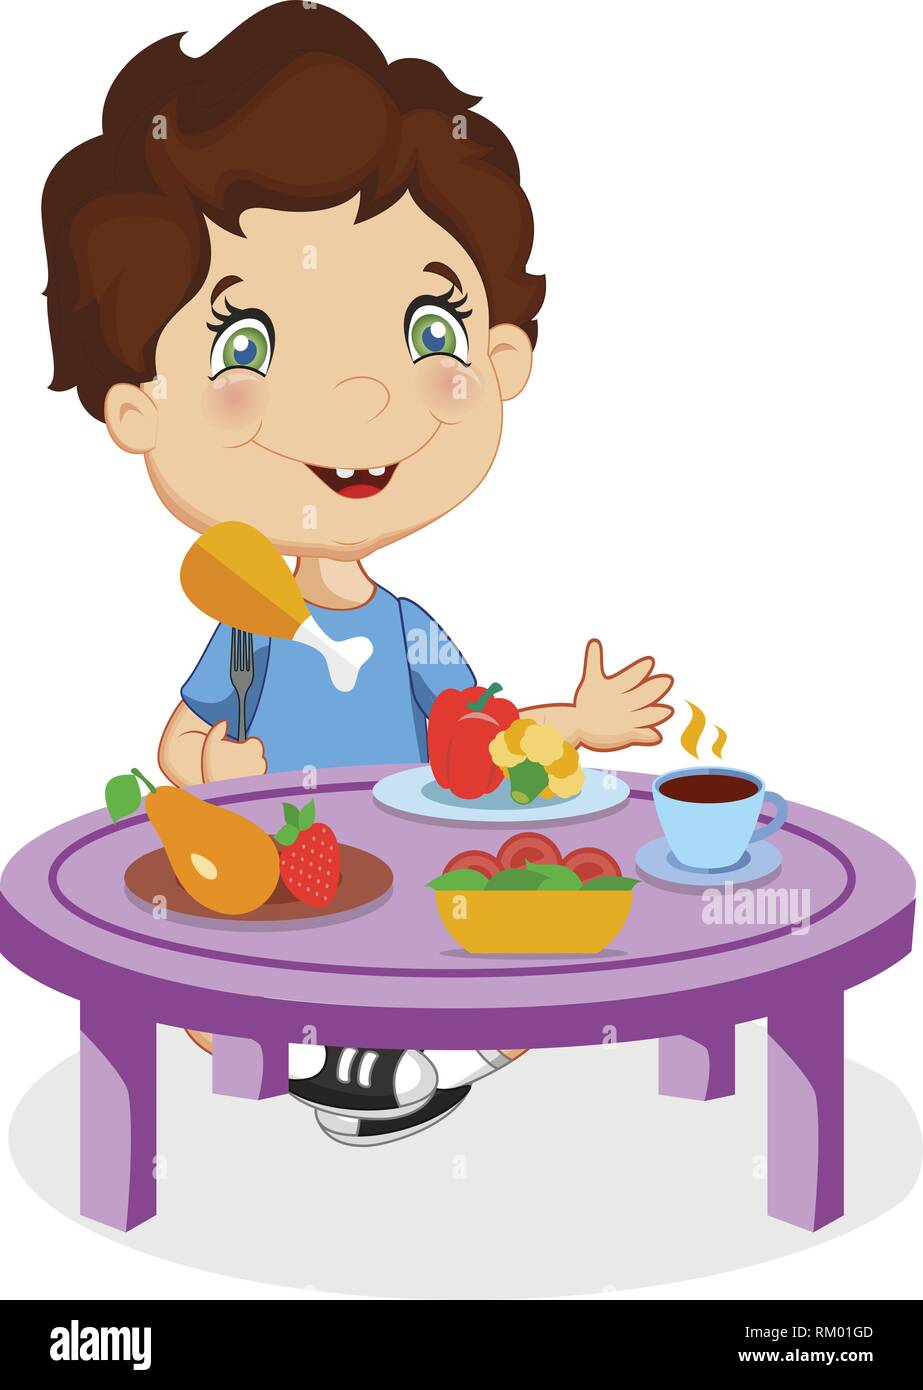 Funny Smiling Cartoon Boy with Brown Hair and Blue Eyes Eating Chiken Sitting at Table with Different Food as Vegetable, Fruit Isolated on White Backg Stock Vector